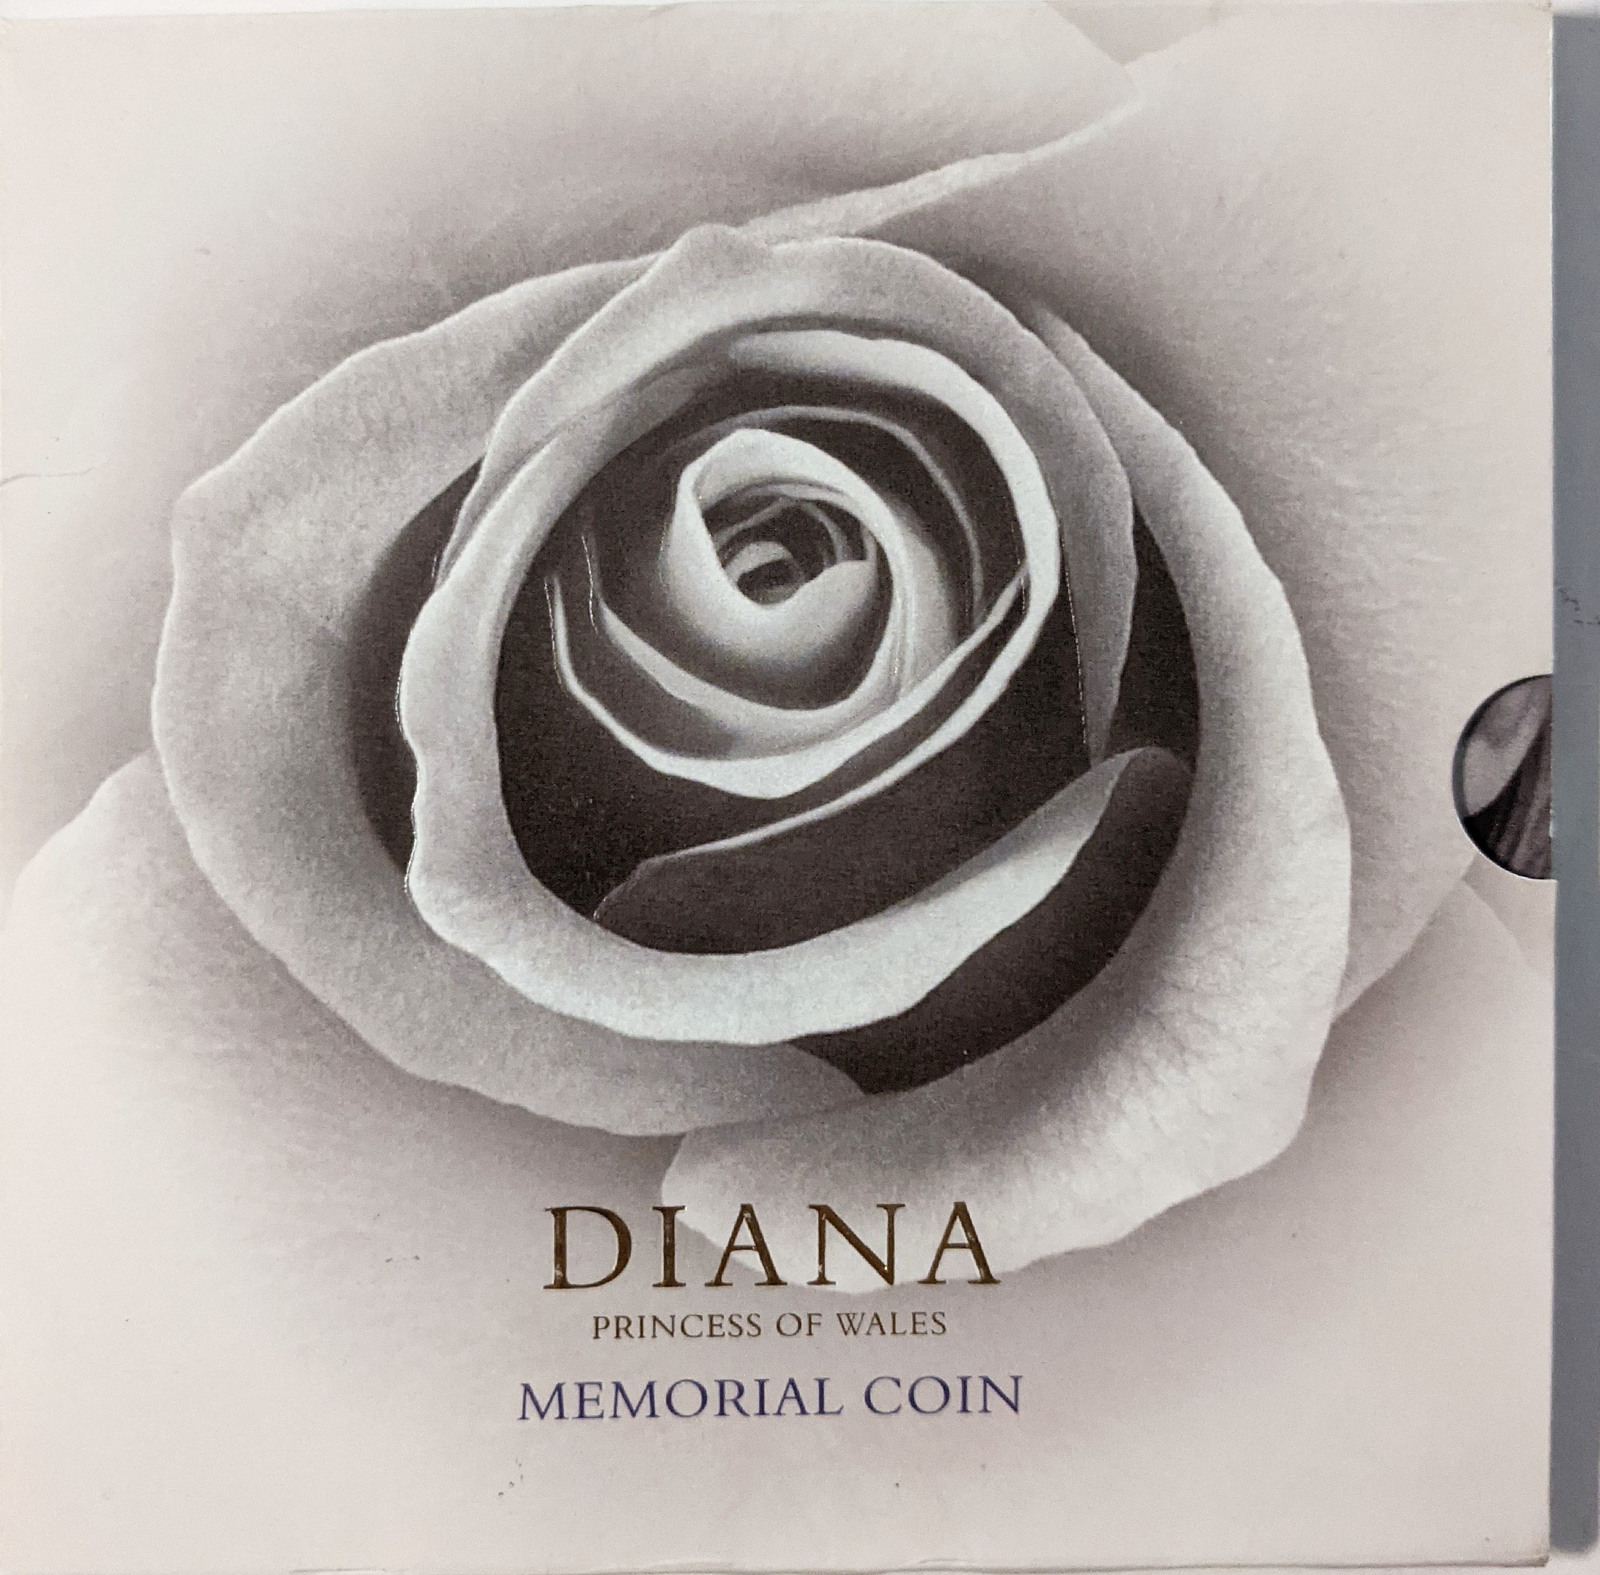 Primary image for Diana Princess of Wales Memorial Coin